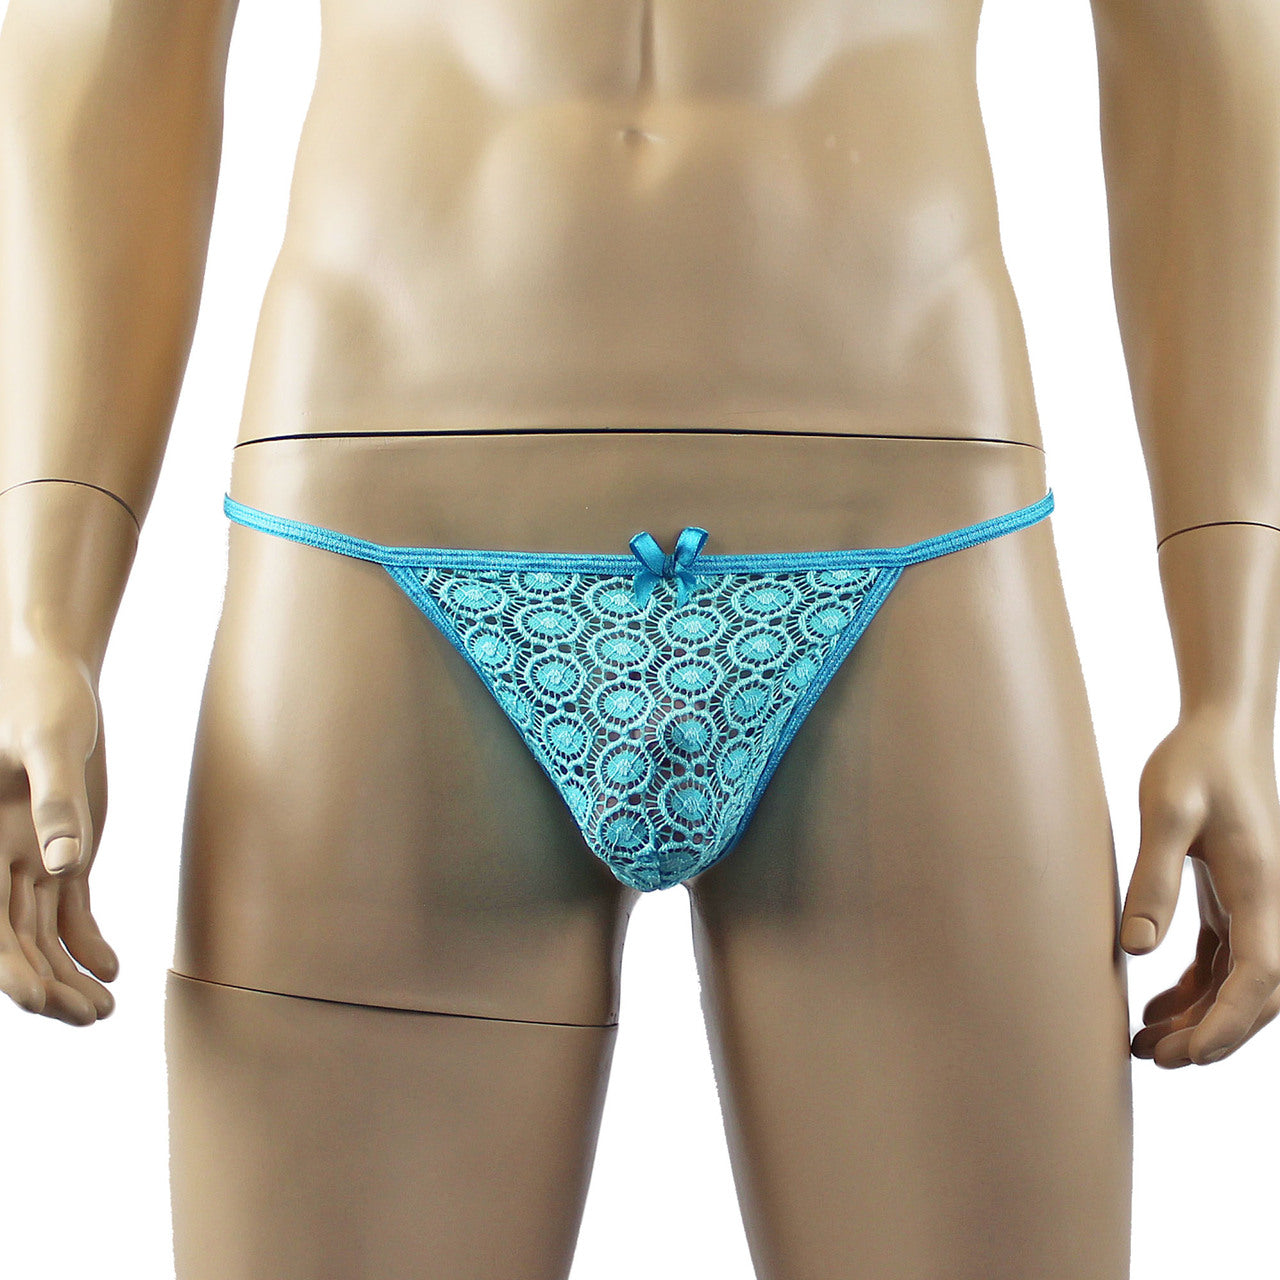 Mens Tease Circle Lace Pouch G string with Cute Bow Front Aqua